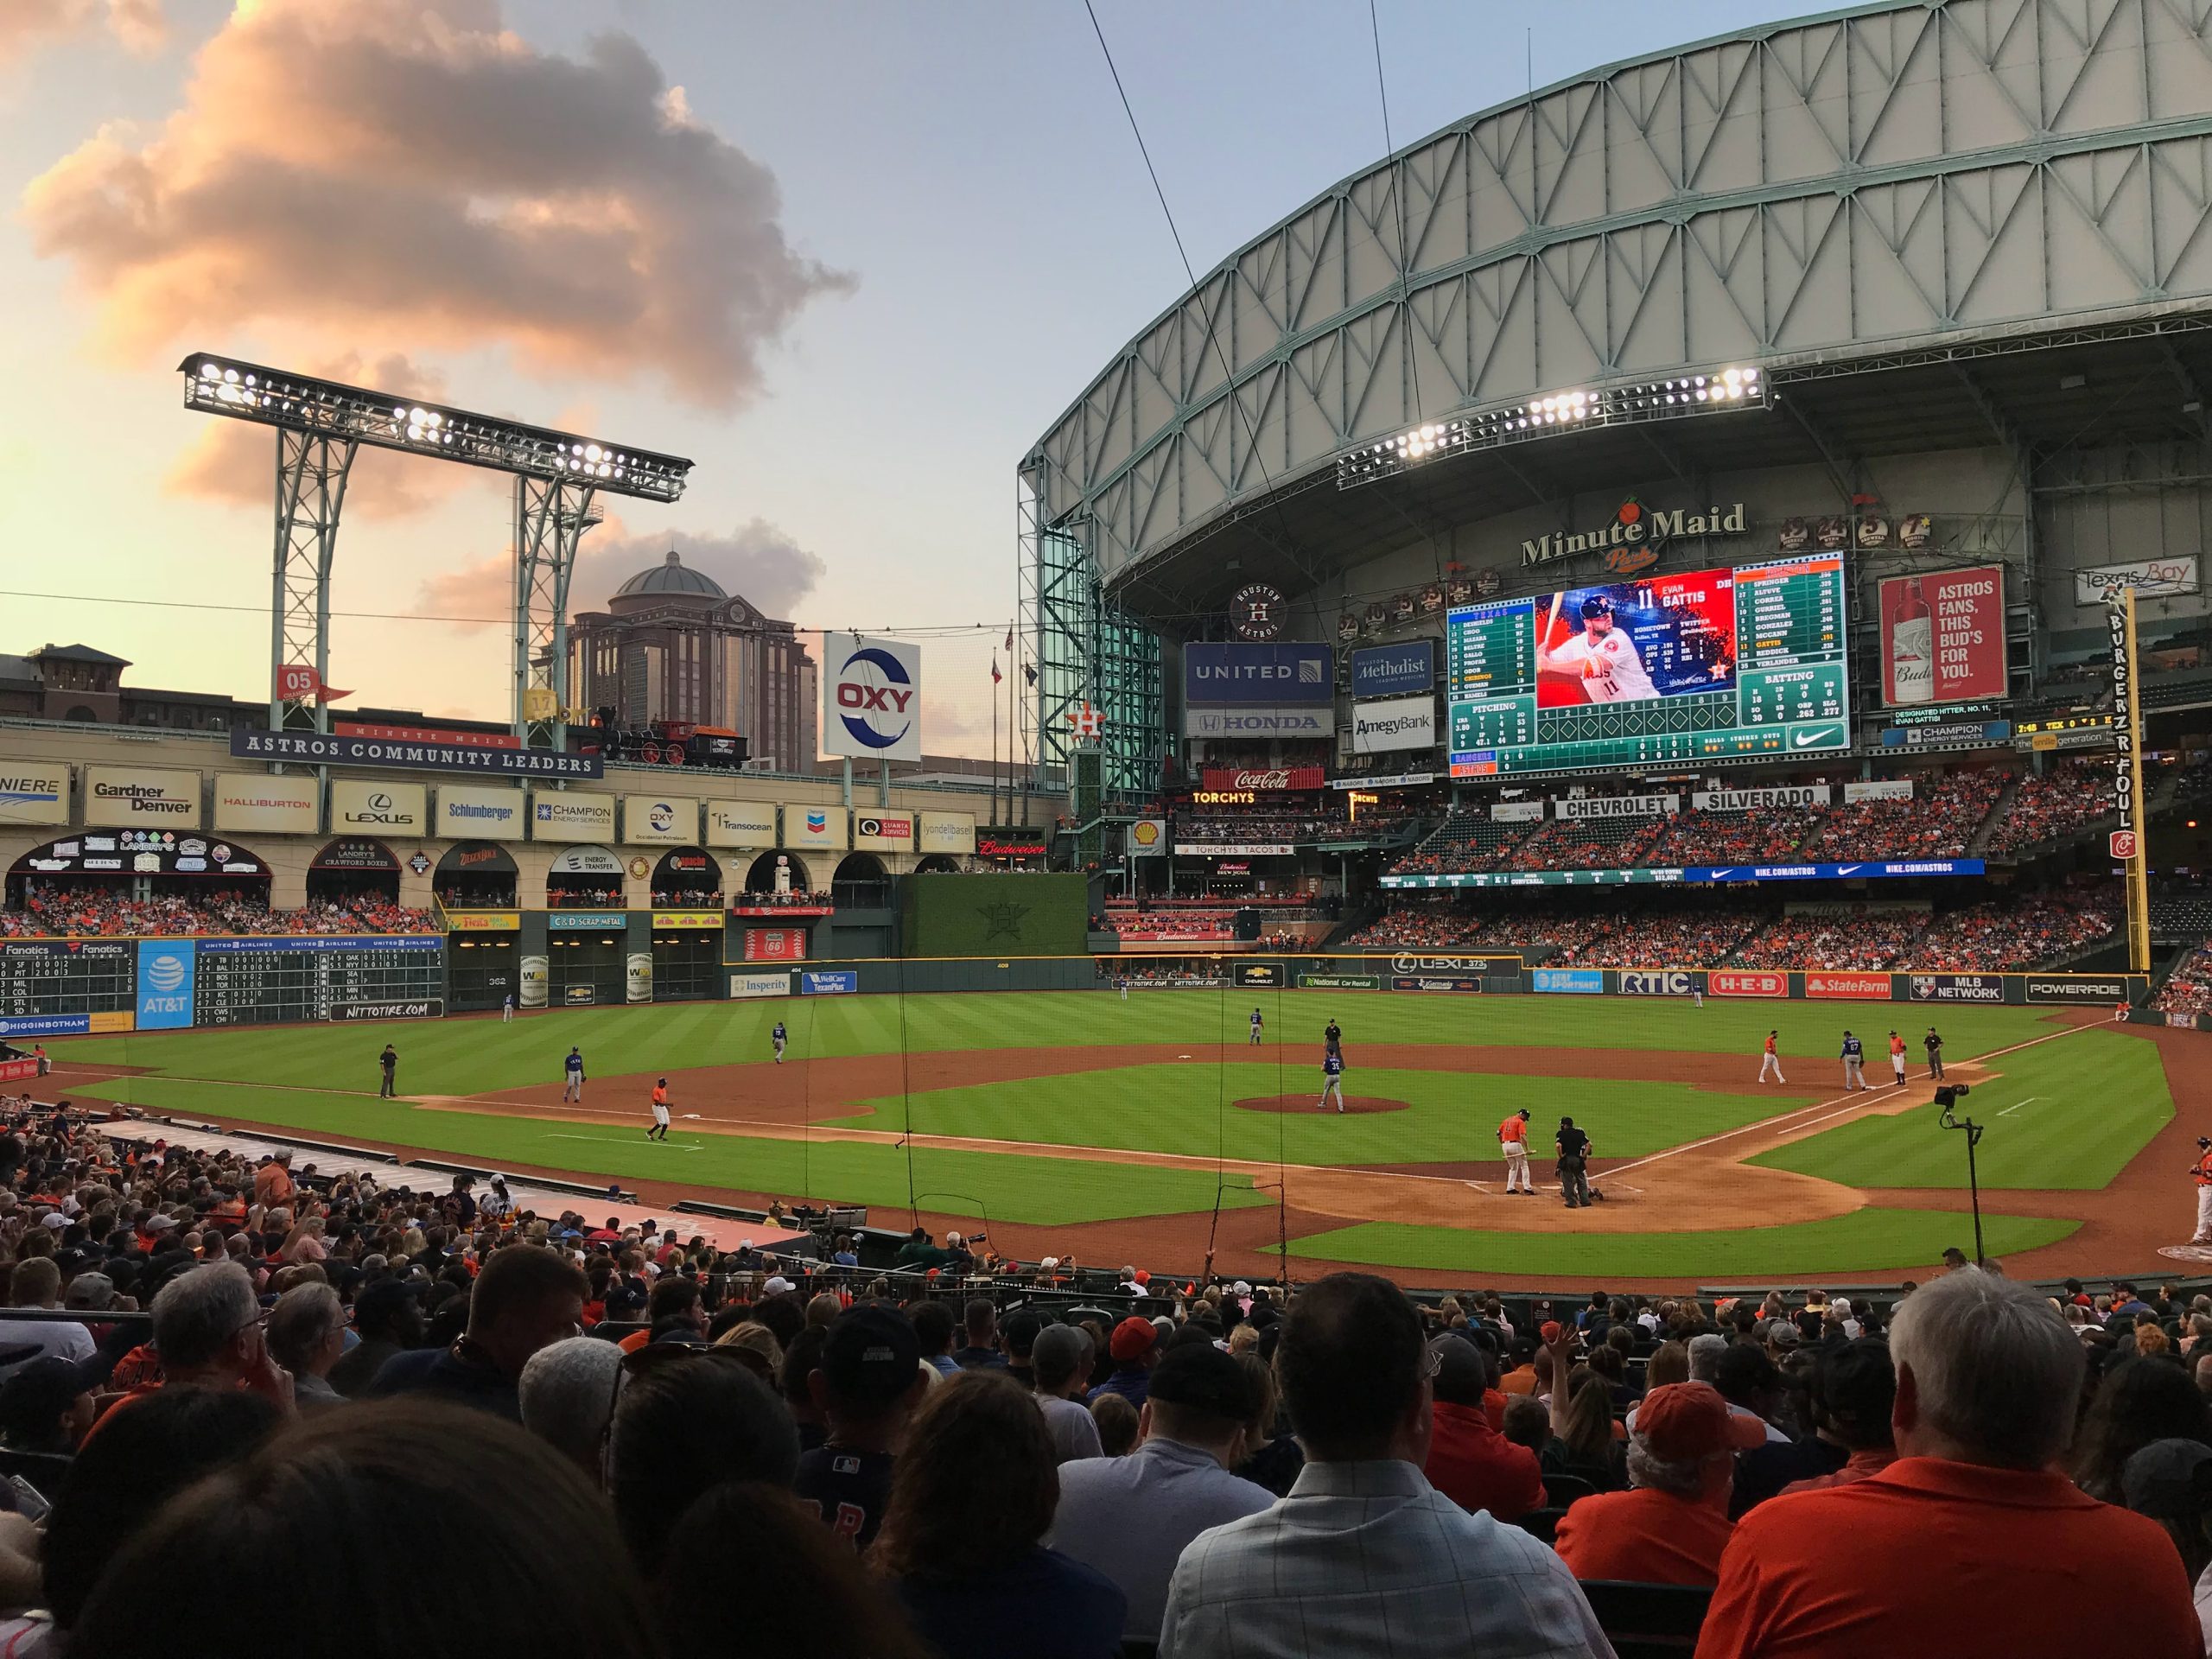 Picture of Minute Maid Park in Houston with a baseball game underway.